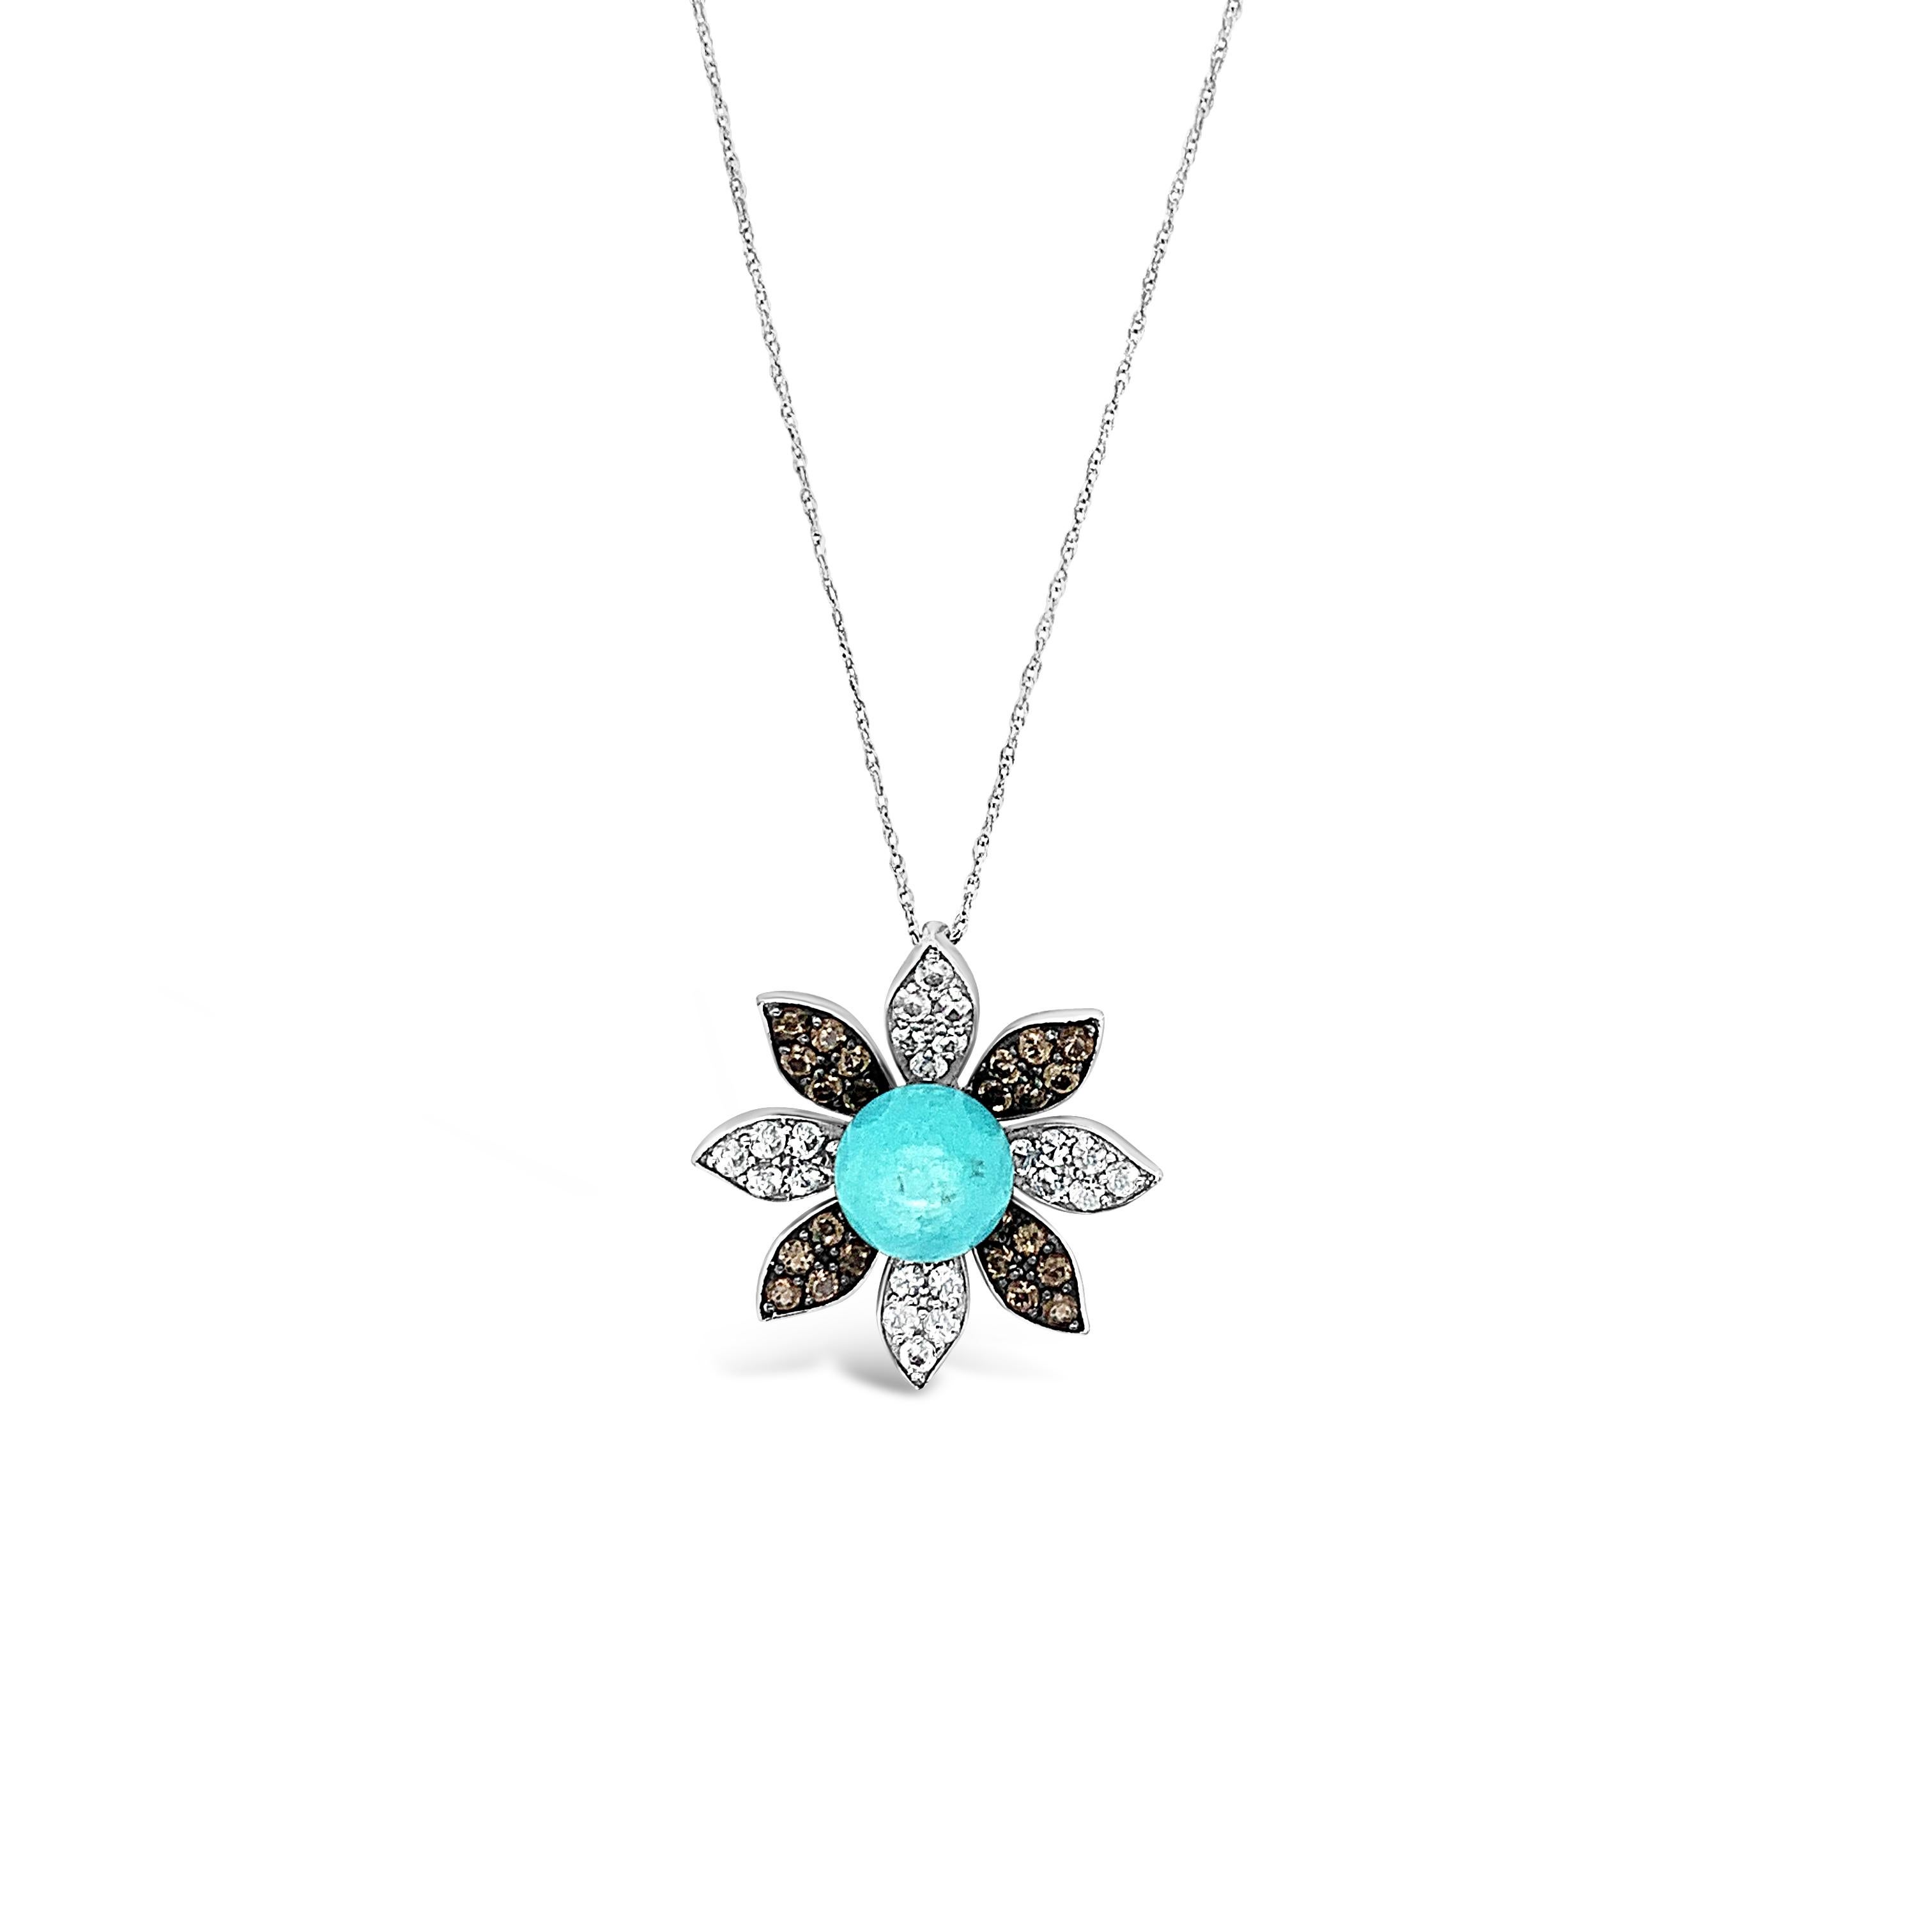 Round Cut Carlo Viani 14 Karat White Gold Flower Shaped Round Turquoise Pendant Necklace For Sale